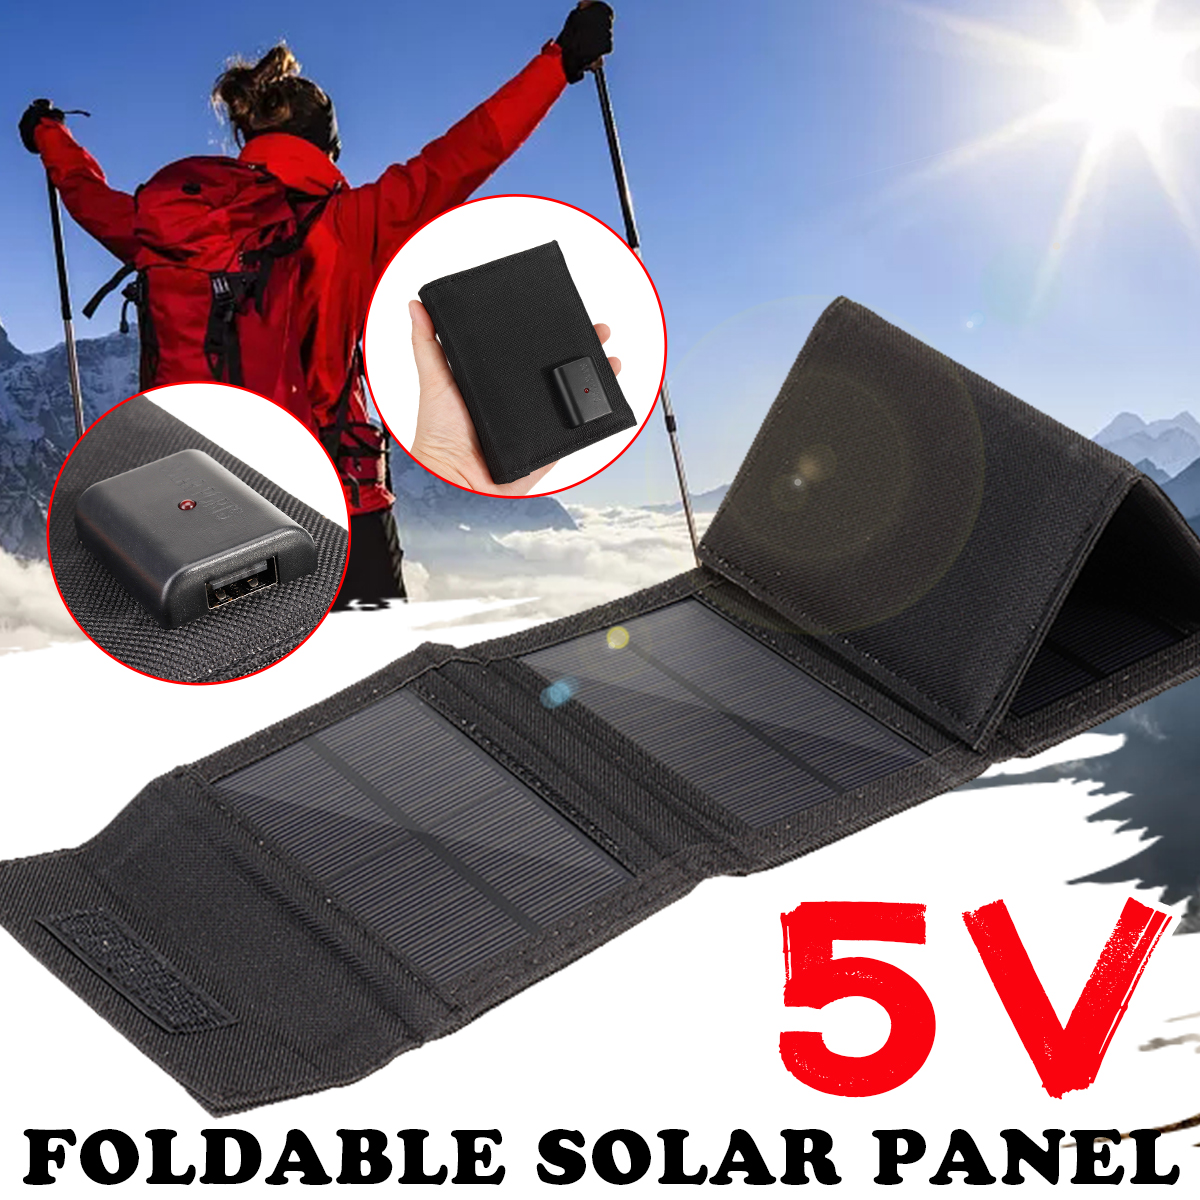 80W-5V-USB-Monocrystalline-Solar-Panel-Folding-Power-Bank-Outdoor-Camping-Hiking-Phone-Charger-1873791-2